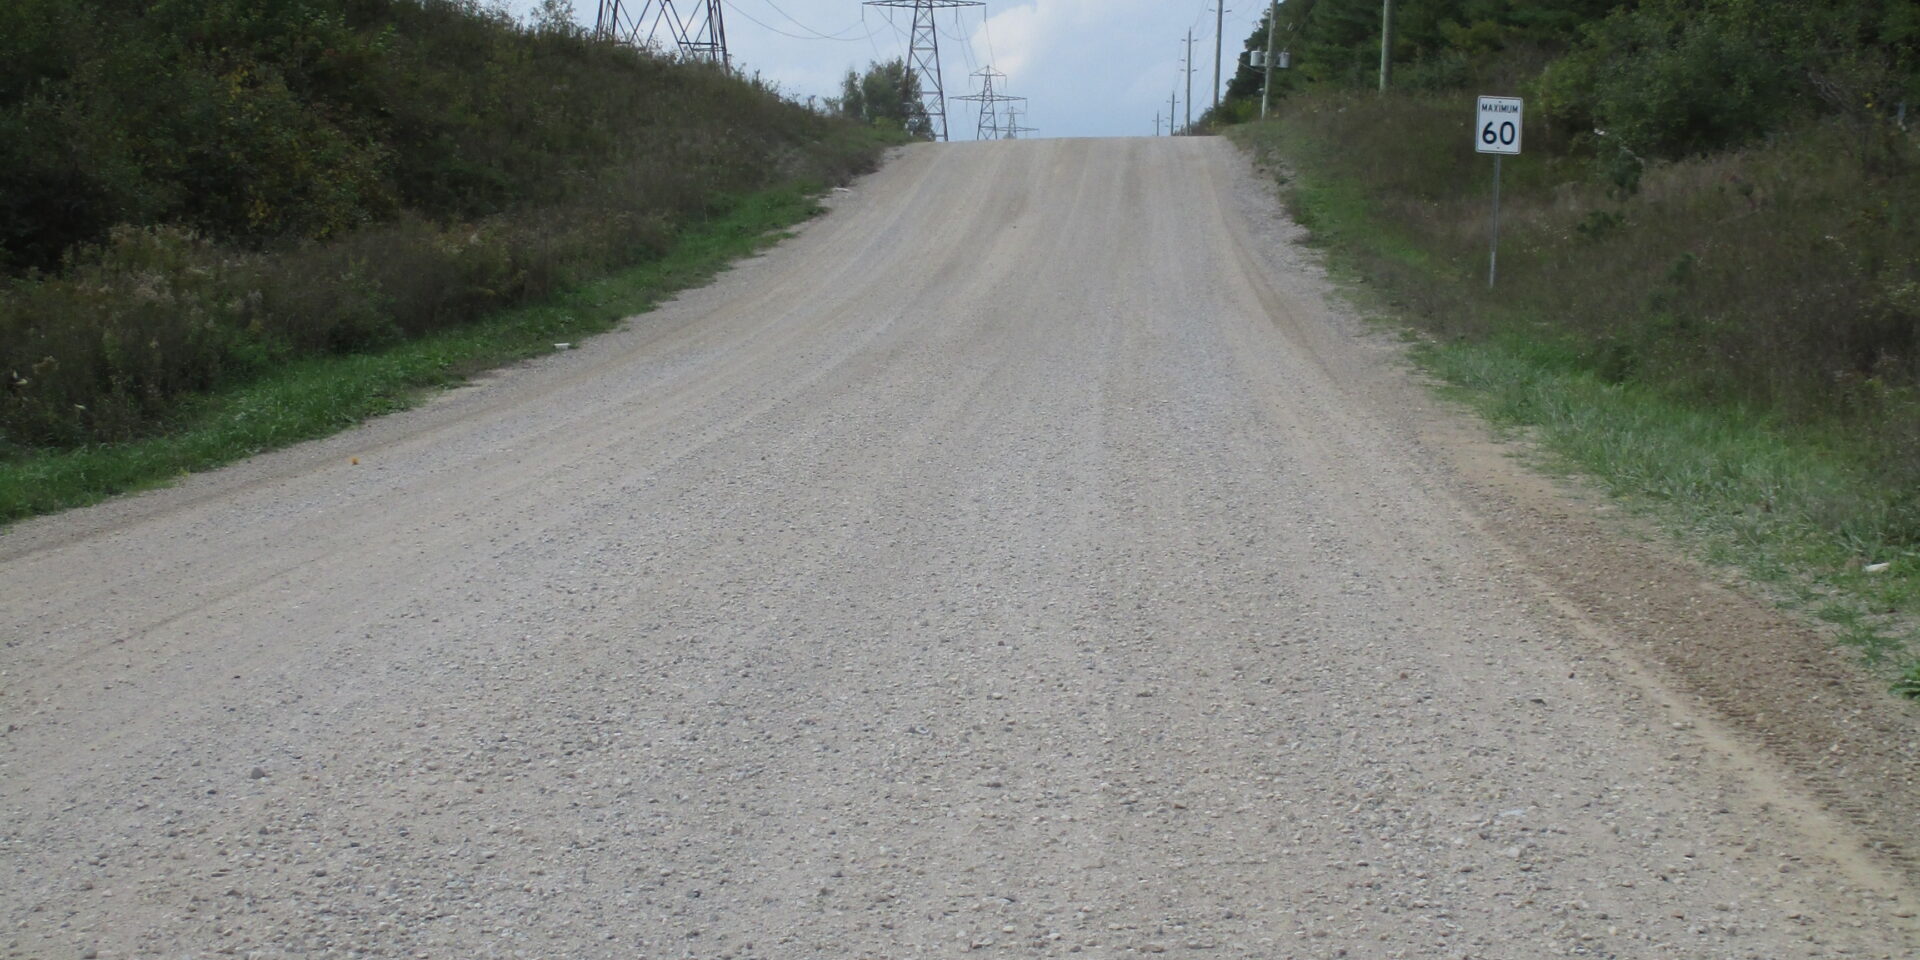 Photograph of transmission towers on Concession Road 7